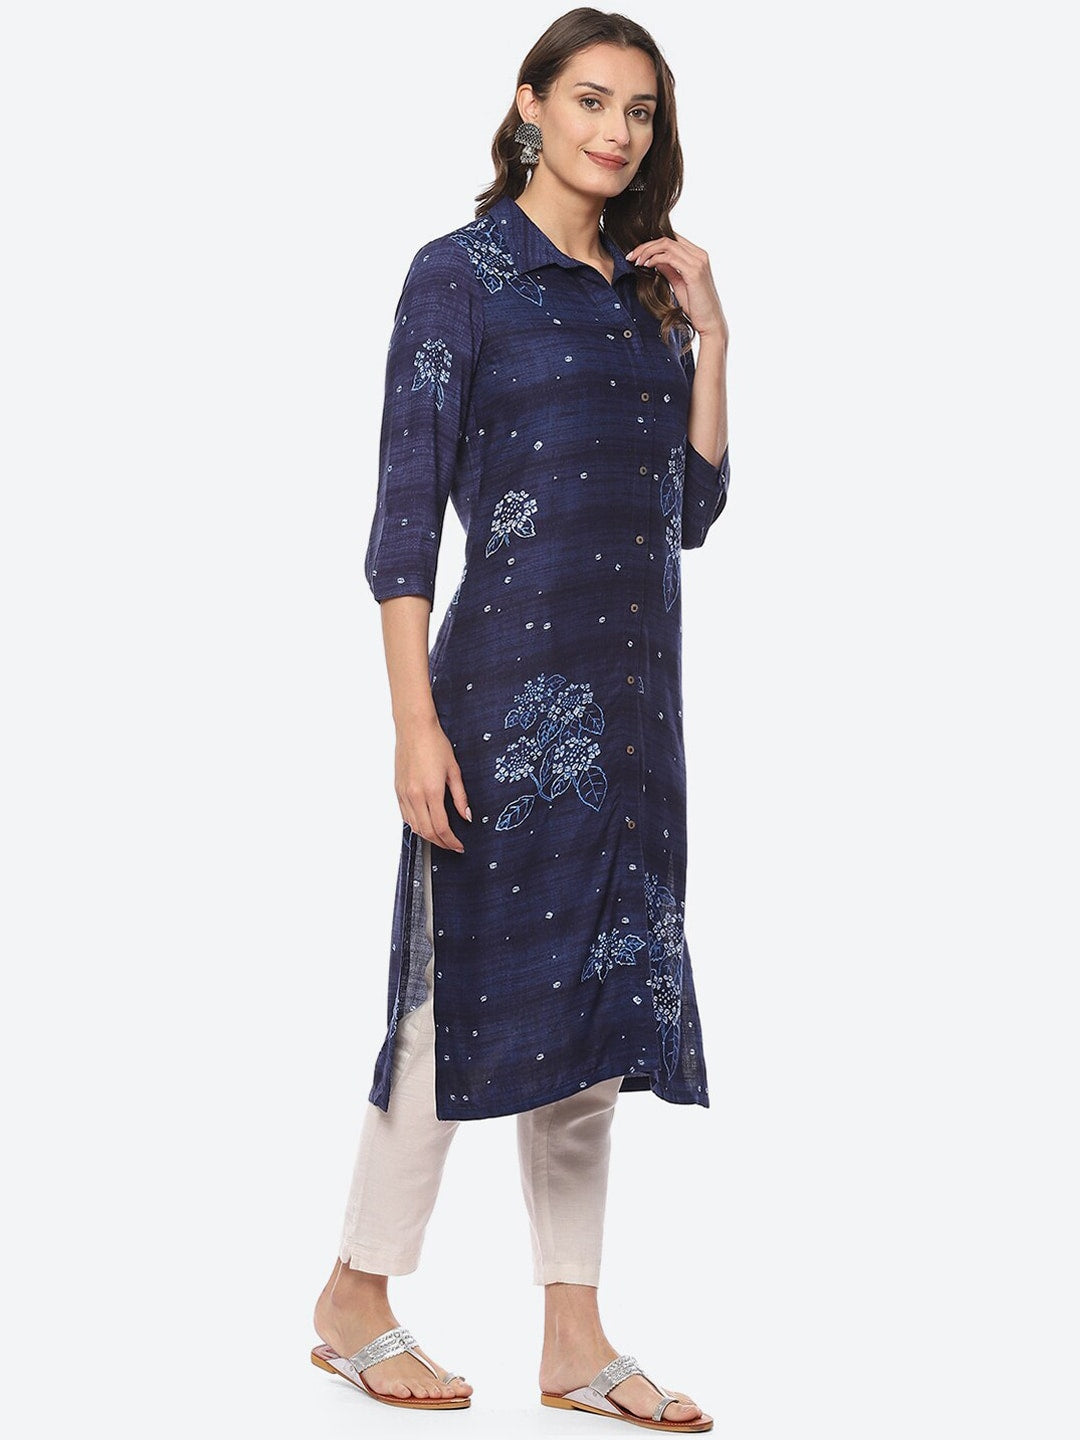 25 Latest Collection of Biba Kurtis For Women - Stylish Models | Kurti  designs latest, How to look classy, Party wear kurtis